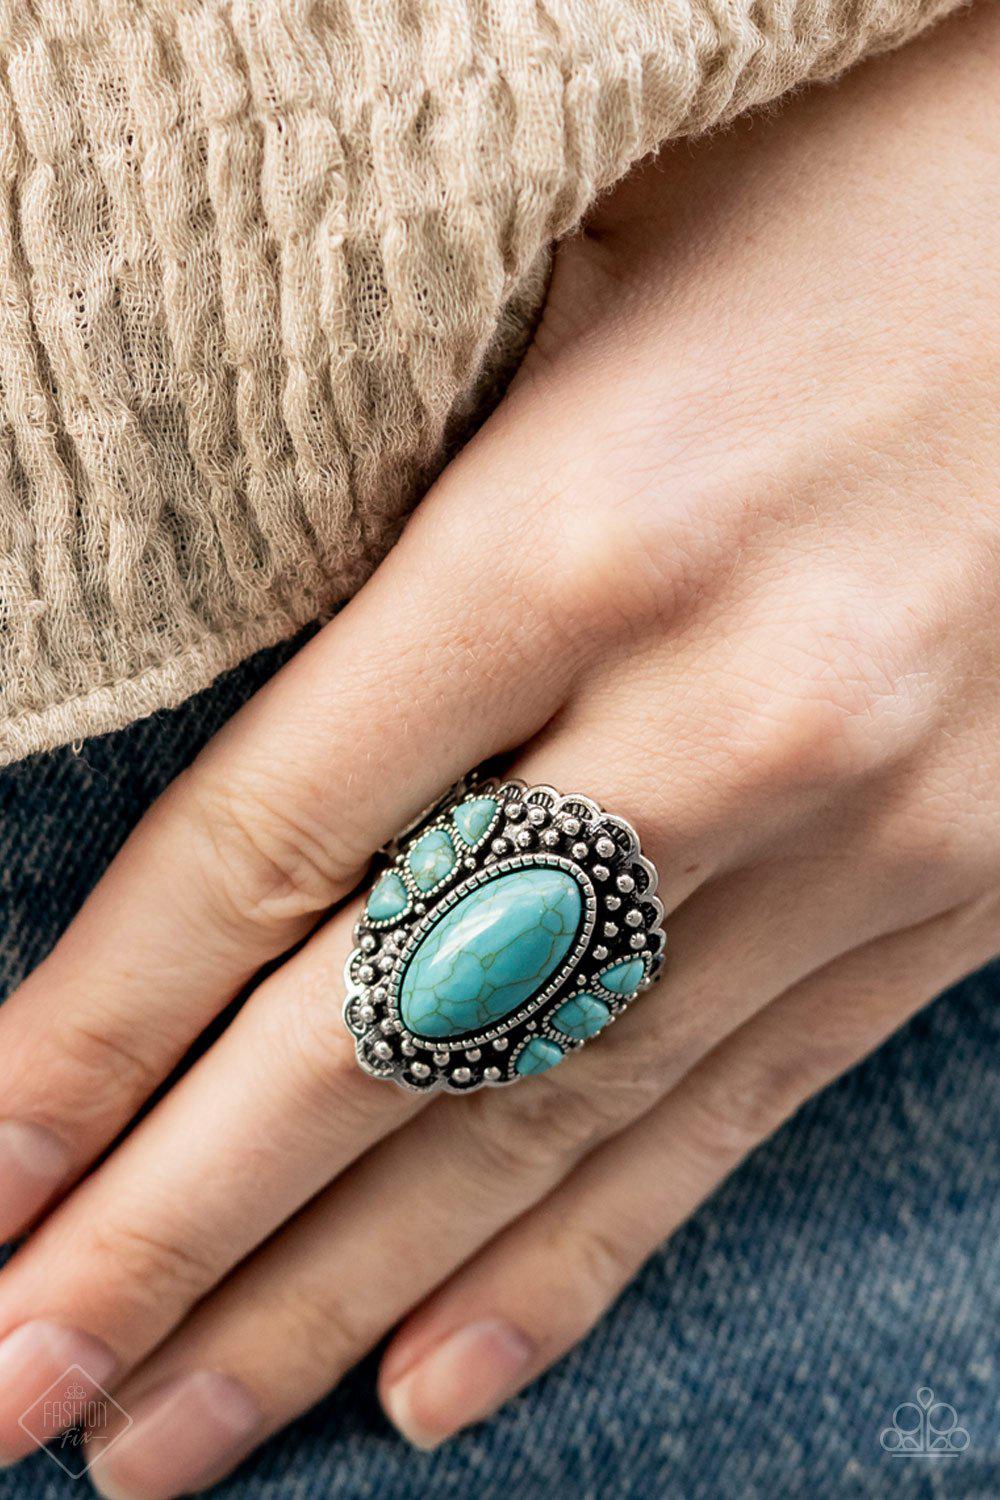 Rustler Road Turquoise Blue Stone Ring - Paparazzi Accessories- lightbox - CarasShop.com - $5 Jewelry by Cara Jewels